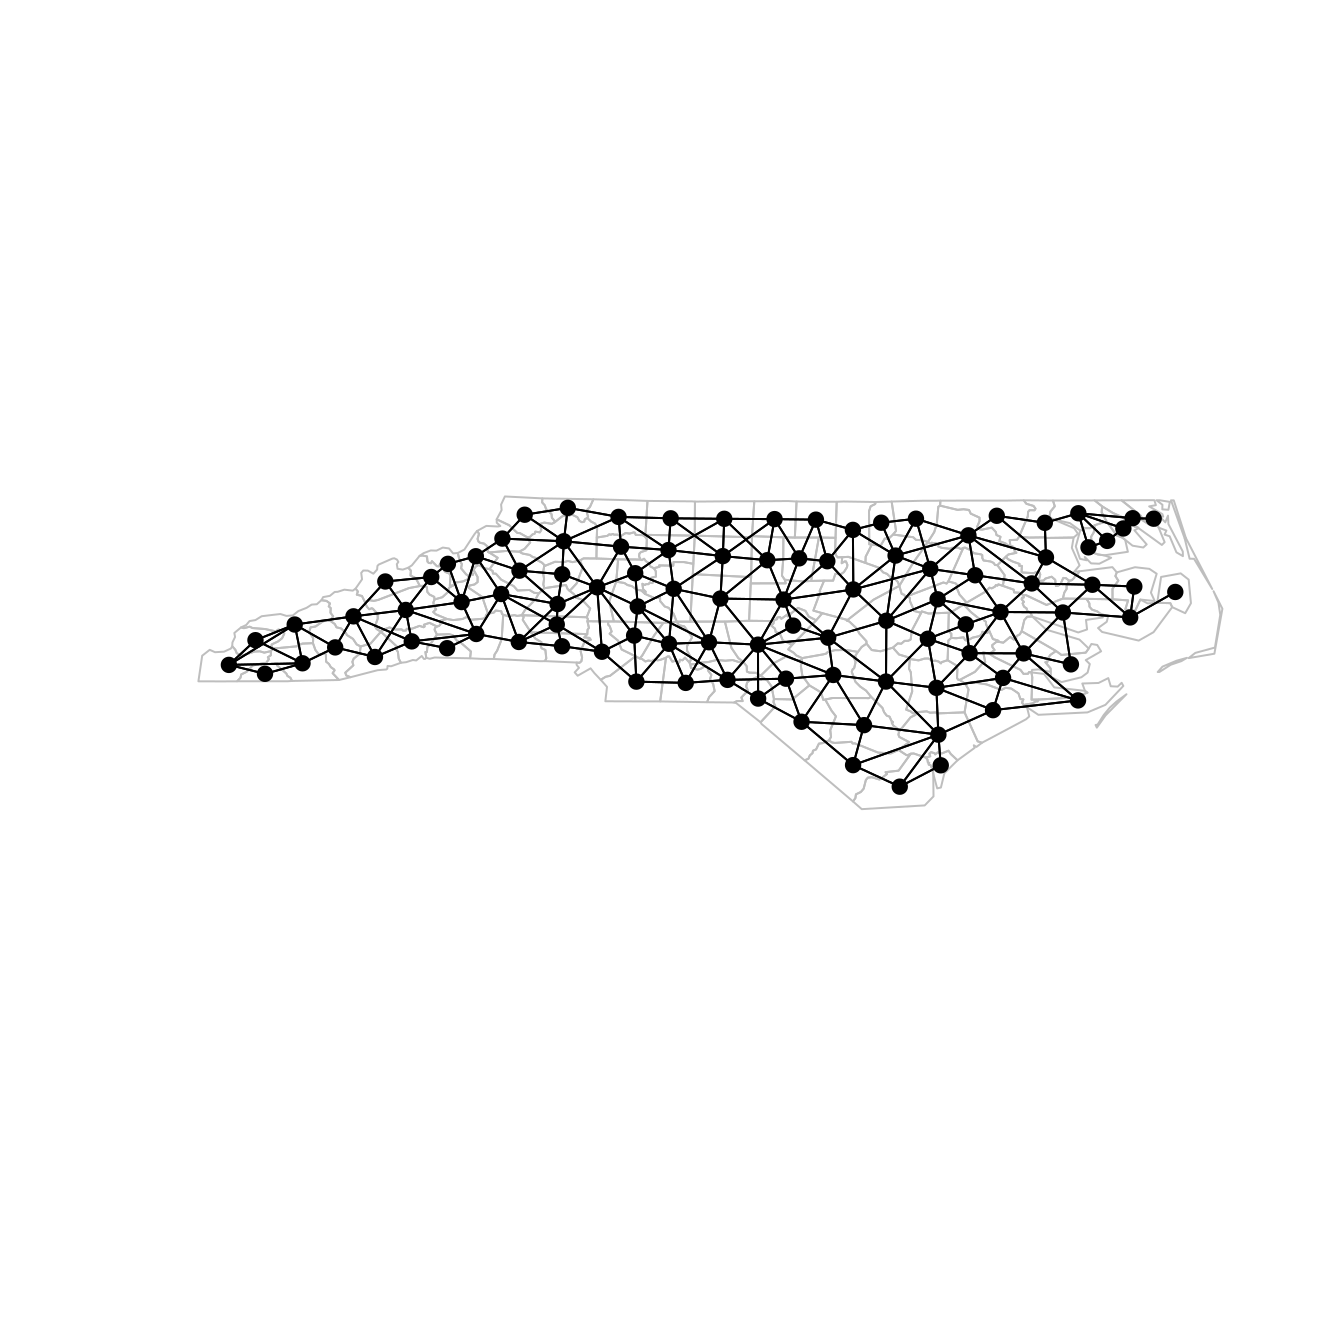 Counties in North Carolina and their neighborhood structure.